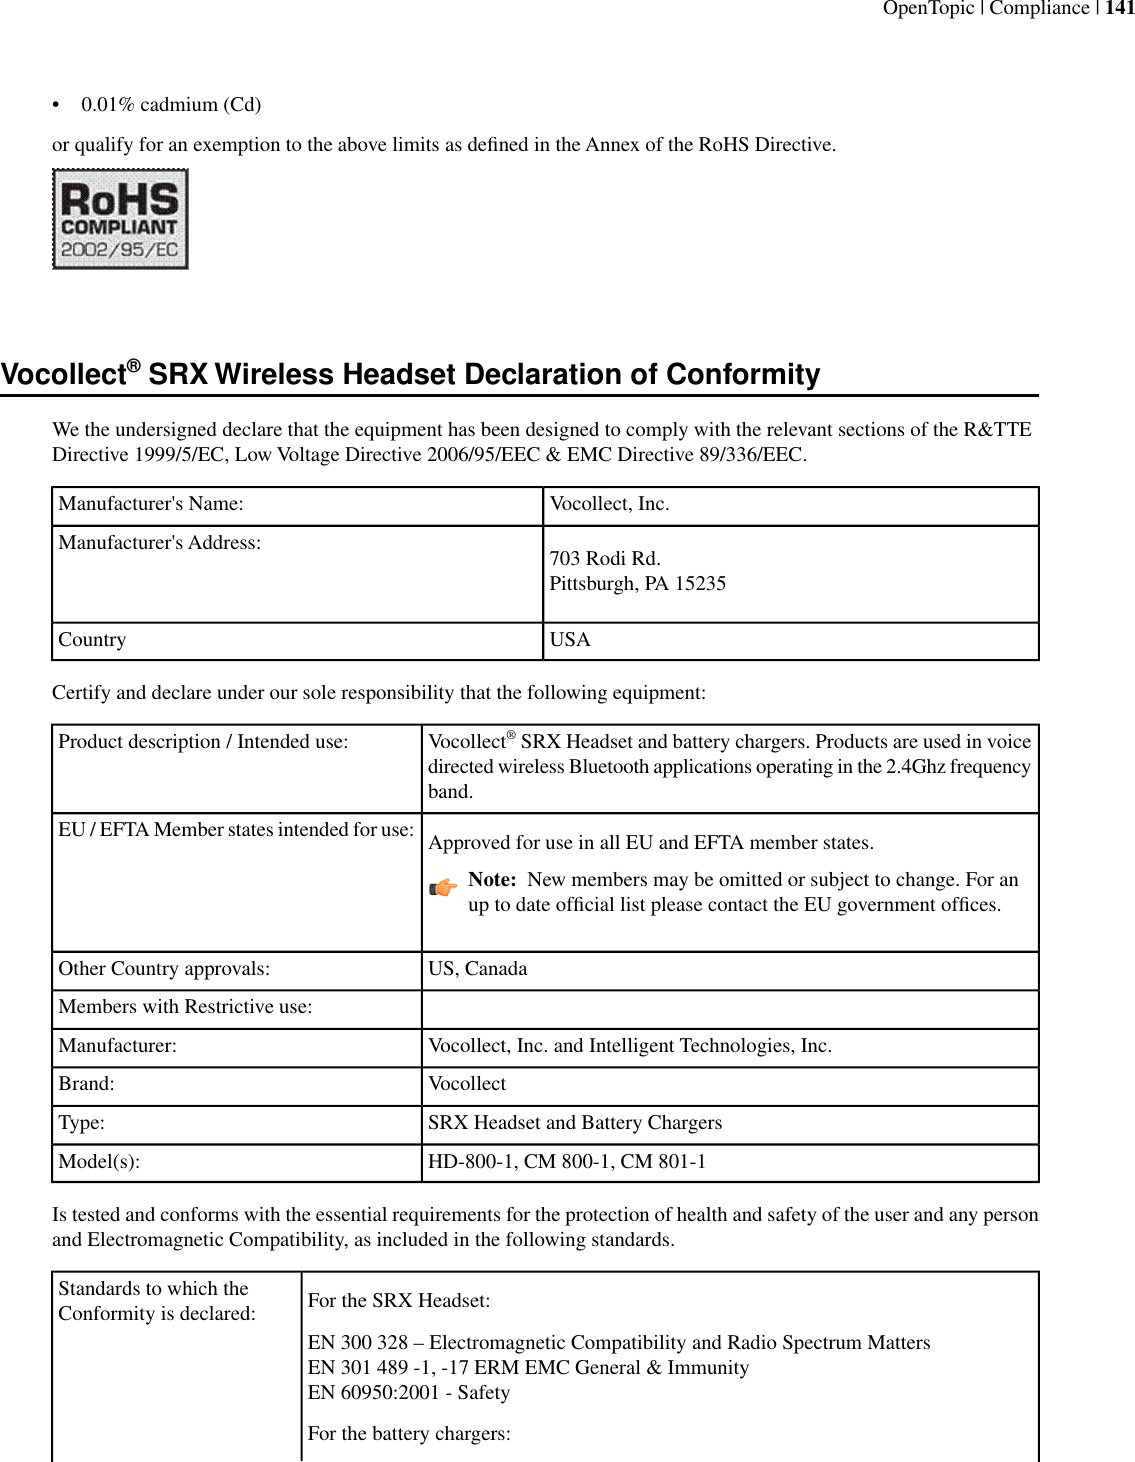 • 0.01% cadmium (Cd)or qualify for an exemption to the above limits as deﬁned in the Annex of the RoHS Directive.Vocollect® SRX Wireless Headset Declaration of ConformityWe the undersigned declare that the equipment has been designed to comply with the relevant sections of the R&amp;TTEDirective 1999/5/EC, Low Voltage Directive 2006/95/EEC &amp; EMC Directive 89/336/EEC.Vocollect, Inc.Manufacturer&apos;s Name:703 Rodi Rd.Pittsburgh, PA 15235Manufacturer&apos;s Address:USACountryCertify and declare under our sole responsibility that the following equipment:Vocollect® SRX Headset and battery chargers. Products are used in voicedirected wireless Bluetooth applications operating in the 2.4Ghz frequencyband.Product description / Intended use:Approved for use in all EU and EFTA member states.EU / EFTA Member states intended for use:Note:  New members may be omitted or subject to change. For anup to date ofﬁcial list please contact the EU government ofﬁces.US, CanadaOther Country approvals:Members with Restrictive use:Vocollect, Inc. and Intelligent Technologies, Inc.Manufacturer:VocollectBrand:SRX Headset and Battery ChargersType:HD-800-1, CM 800-1, CM 801-1Model(s):Is tested and conforms with the essential requirements for the protection of health and safety of the user and any personand Electromagnetic Compatibility, as included in the following standards.For the SRX Headset:Standards to which theConformity is declared:EN 300 328 – Electromagnetic Compatibility and Radio Spectrum MattersEN 301 489 -1, -17 ERM EMC General &amp; ImmunityEN 60950:2001 - SafetyFor the battery chargers:OpenTopic | Compliance | 141